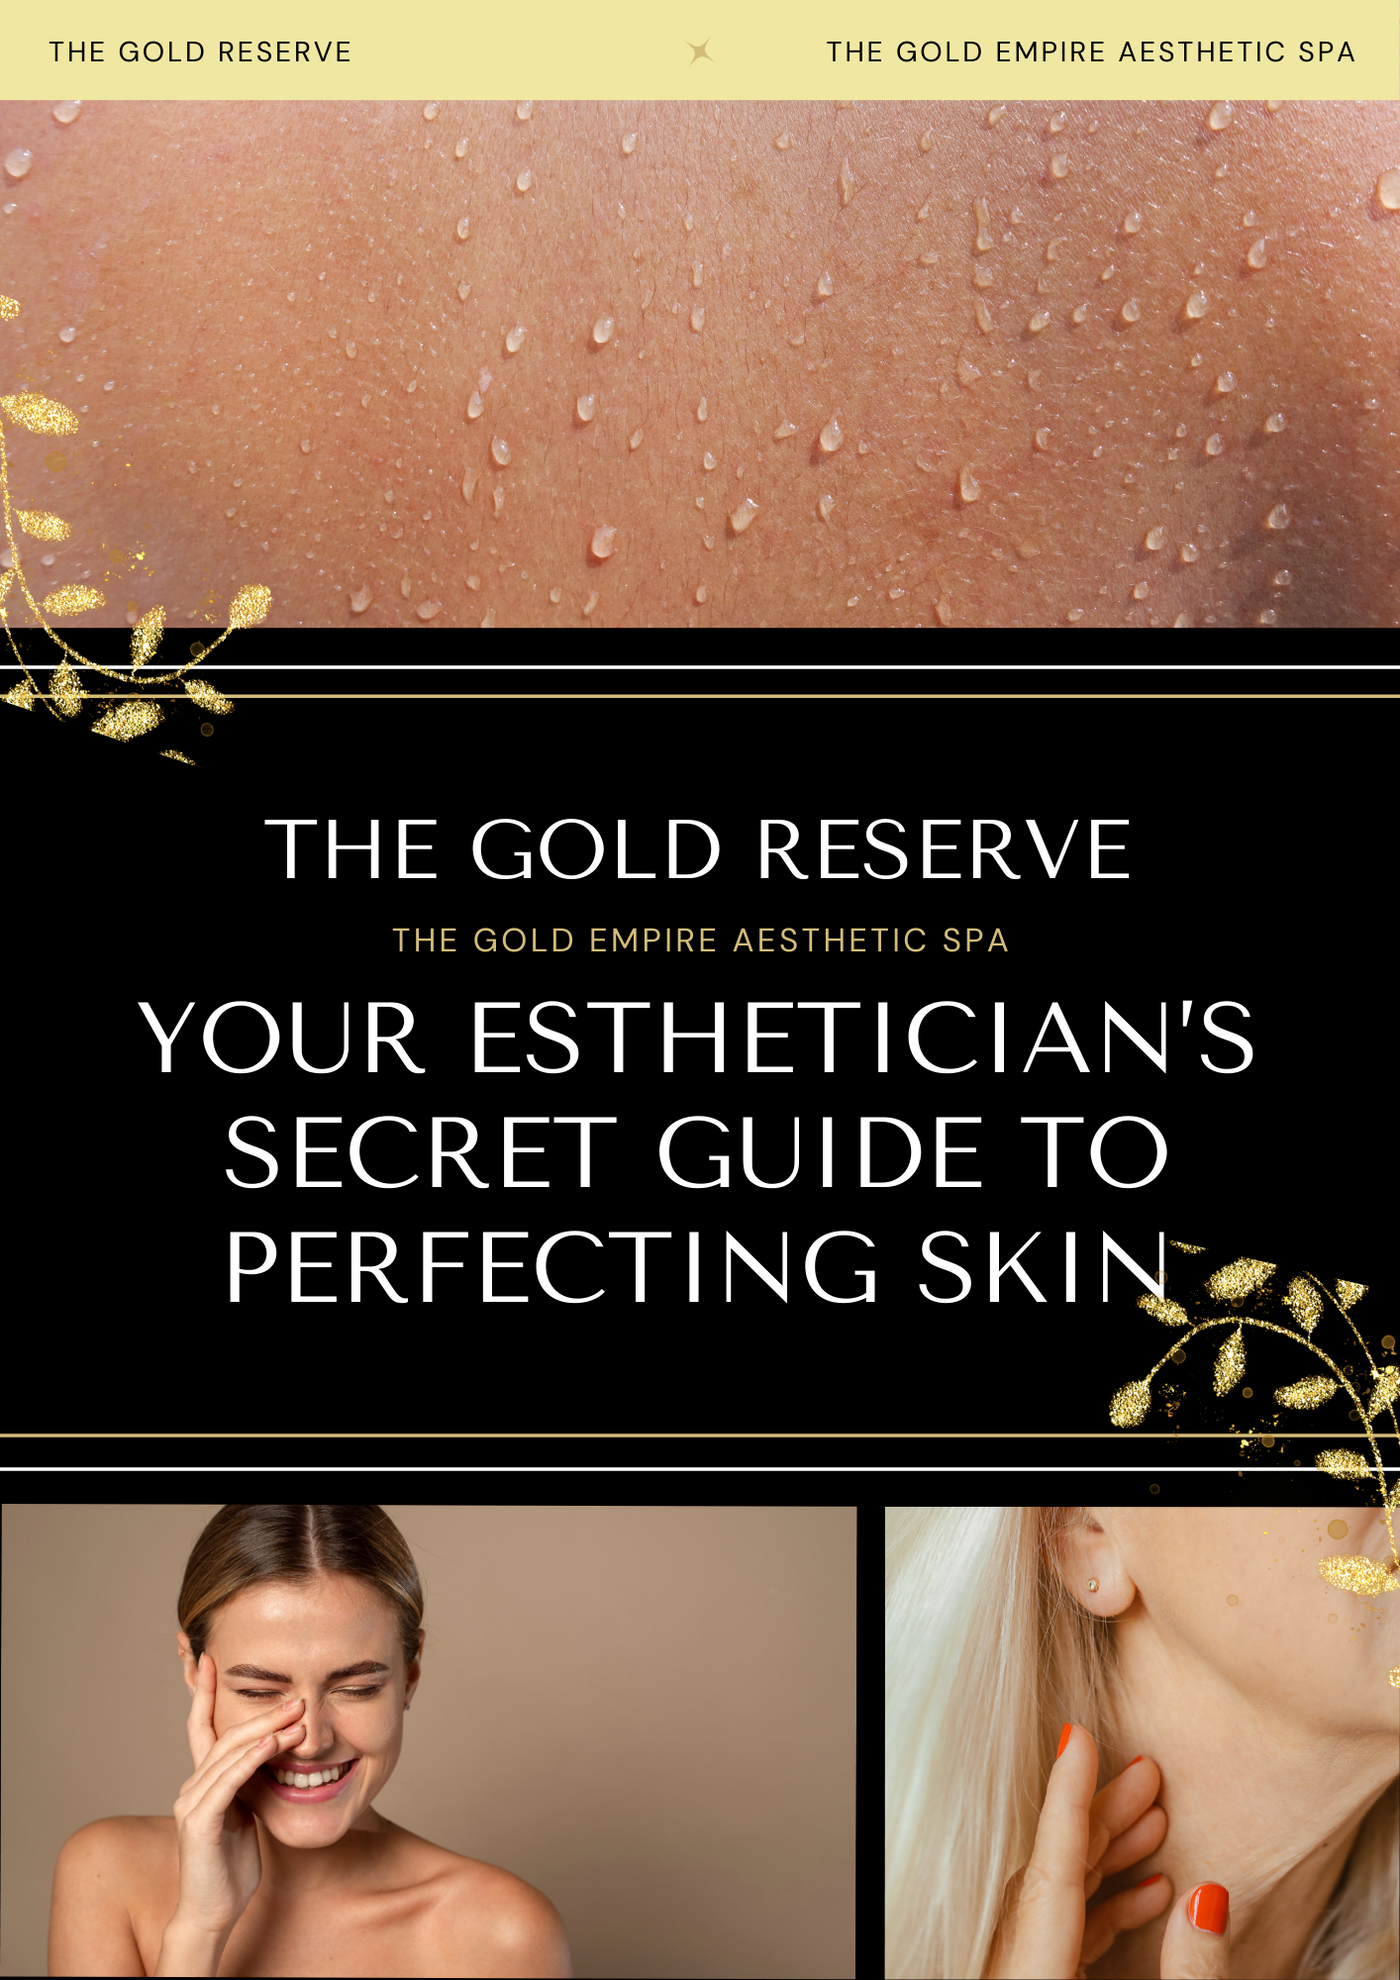 Your Esthetician’s Secret Guide to Perfecting Skin